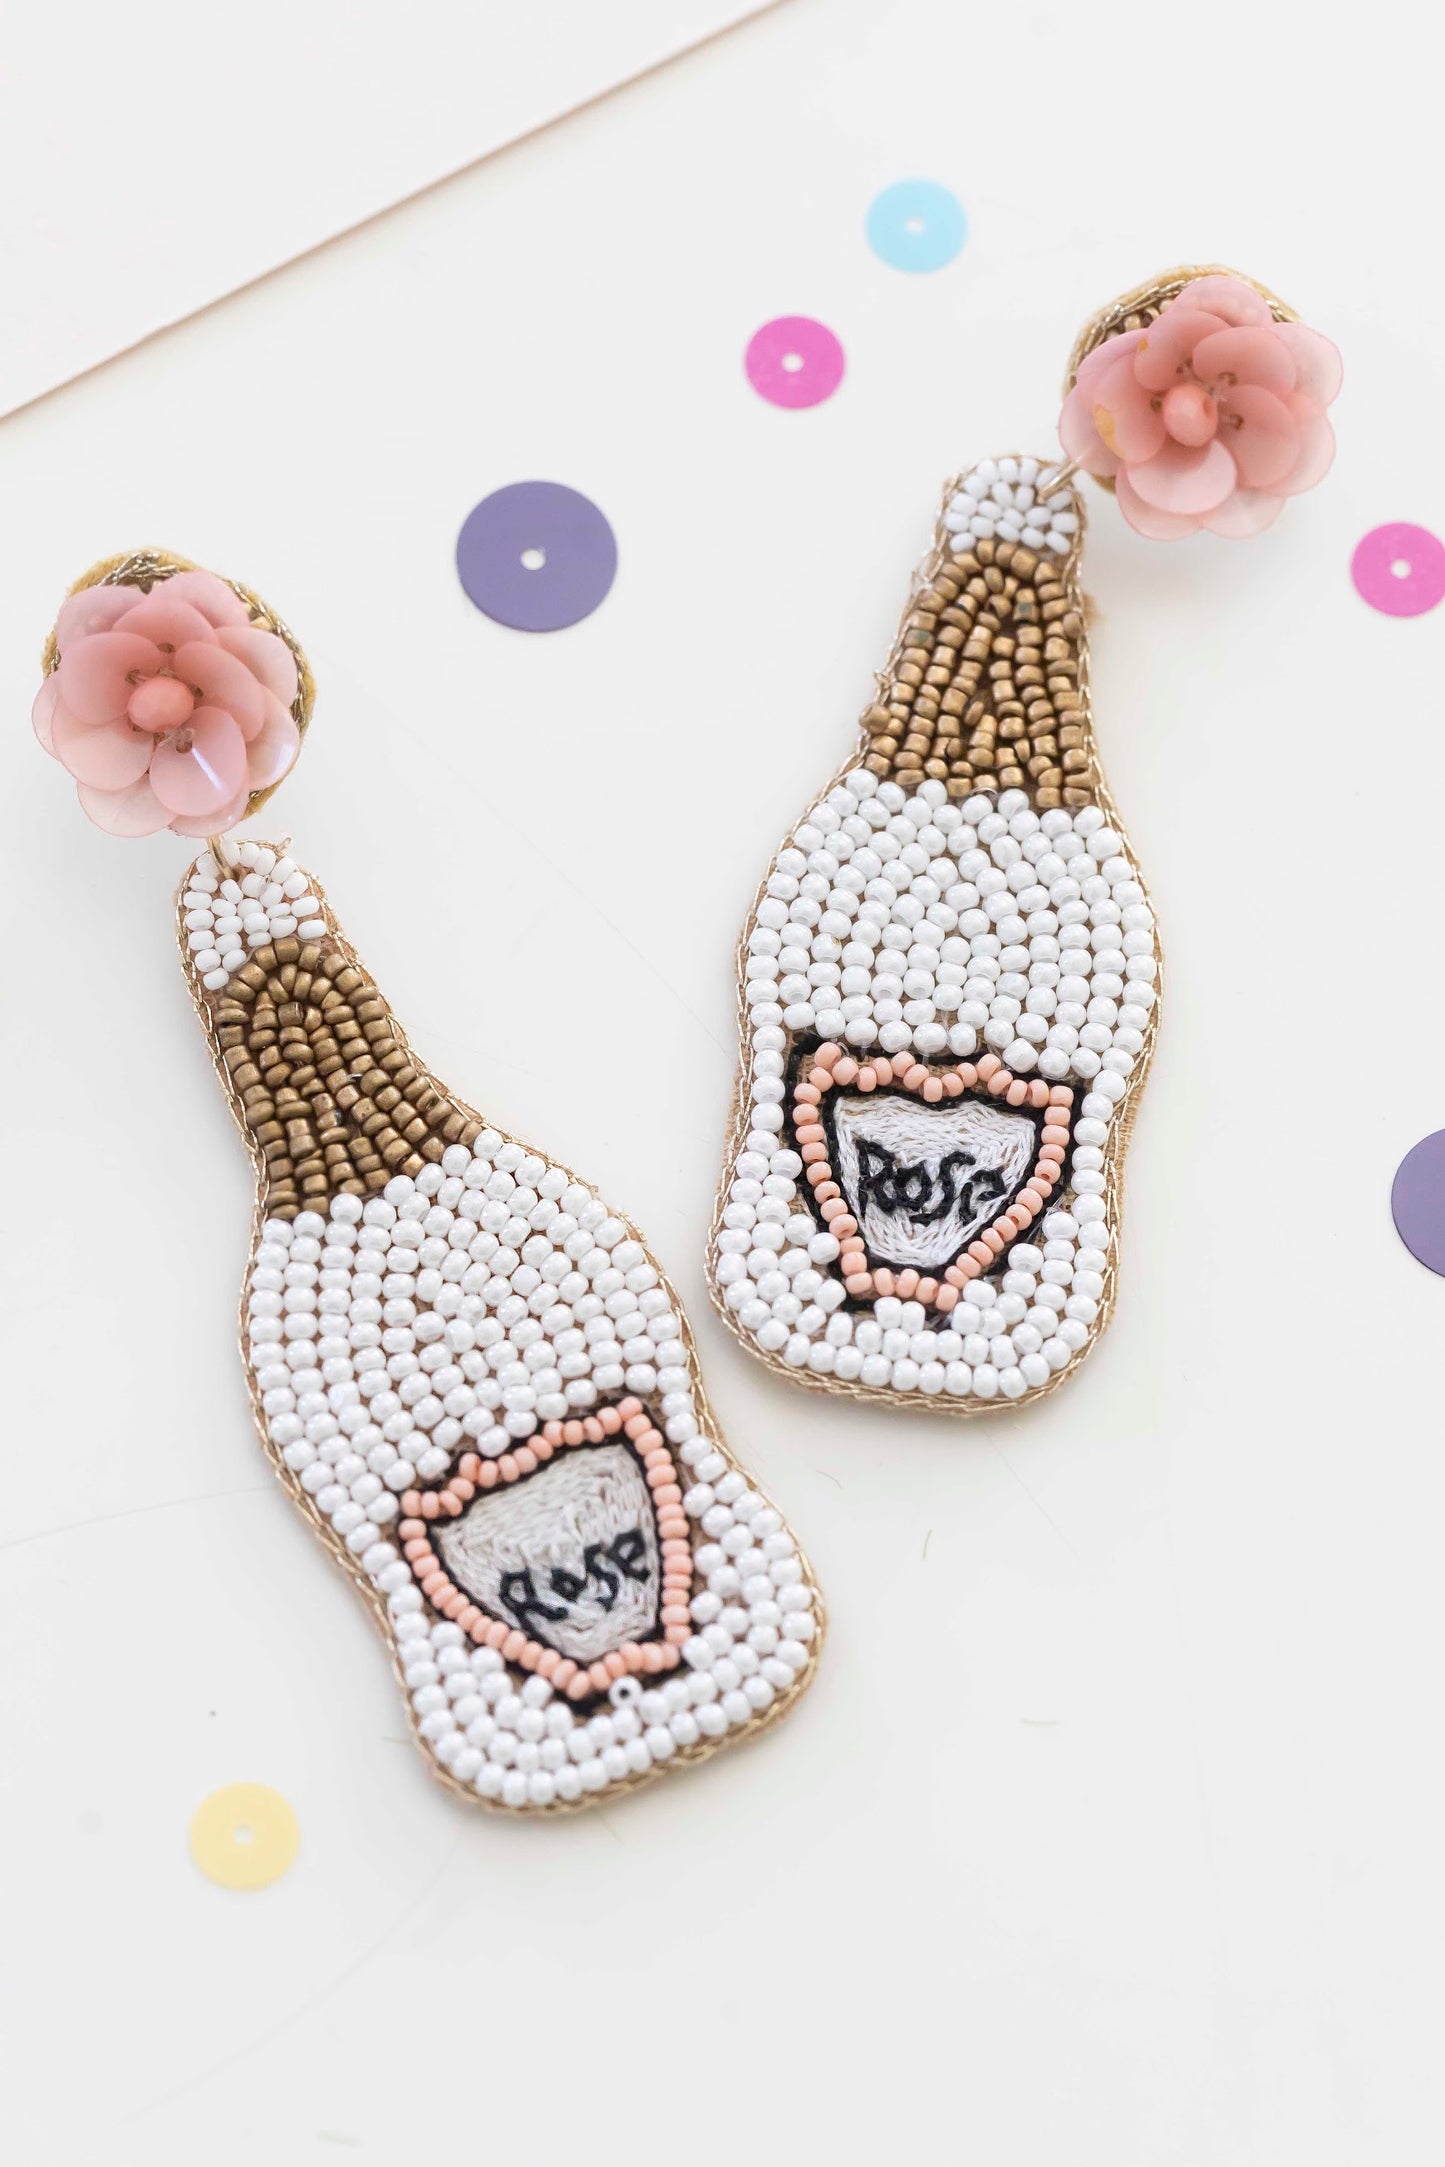 Load image into Gallery viewer, Rose Bottle Hand Beaded Earrings | White Rose Bottle Earrings | Special Occasion Wedding and Bachelorette Party Earrings
